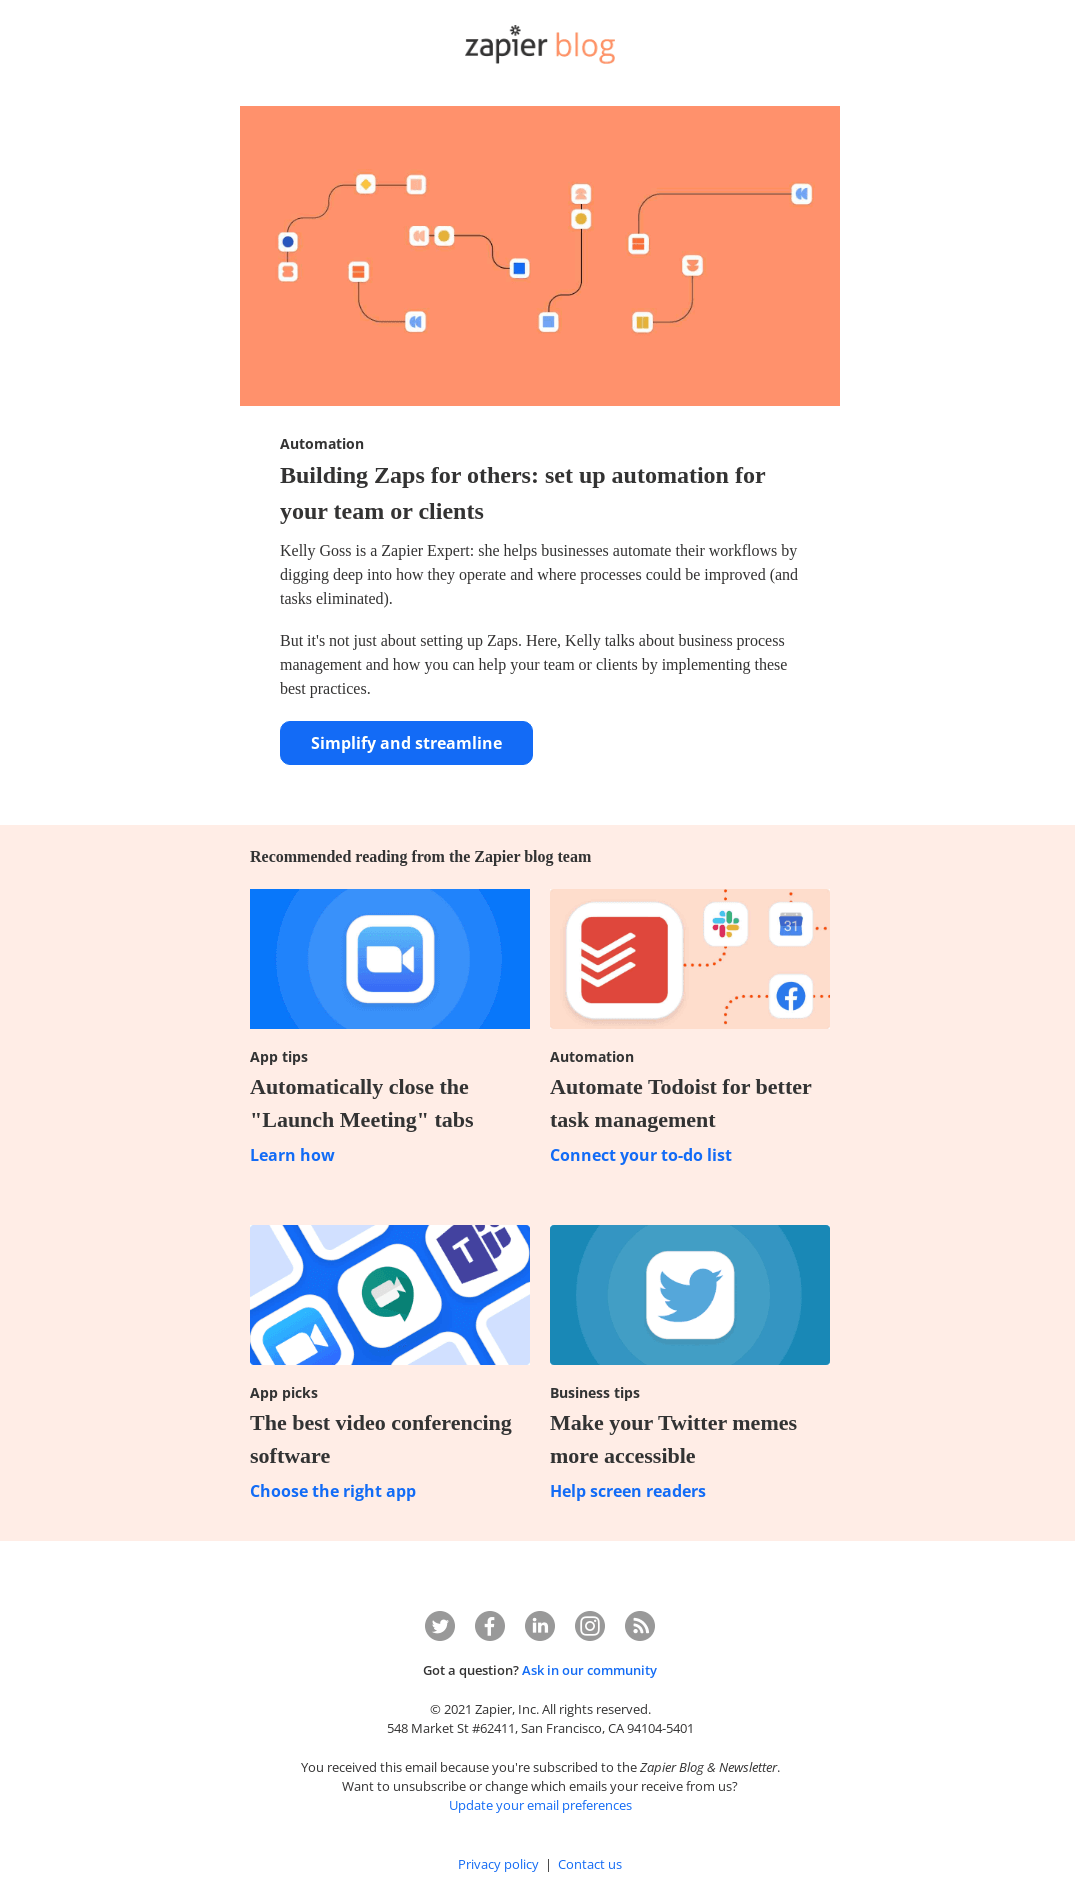 Zapier's email template promotes their blog posts to subscribers.